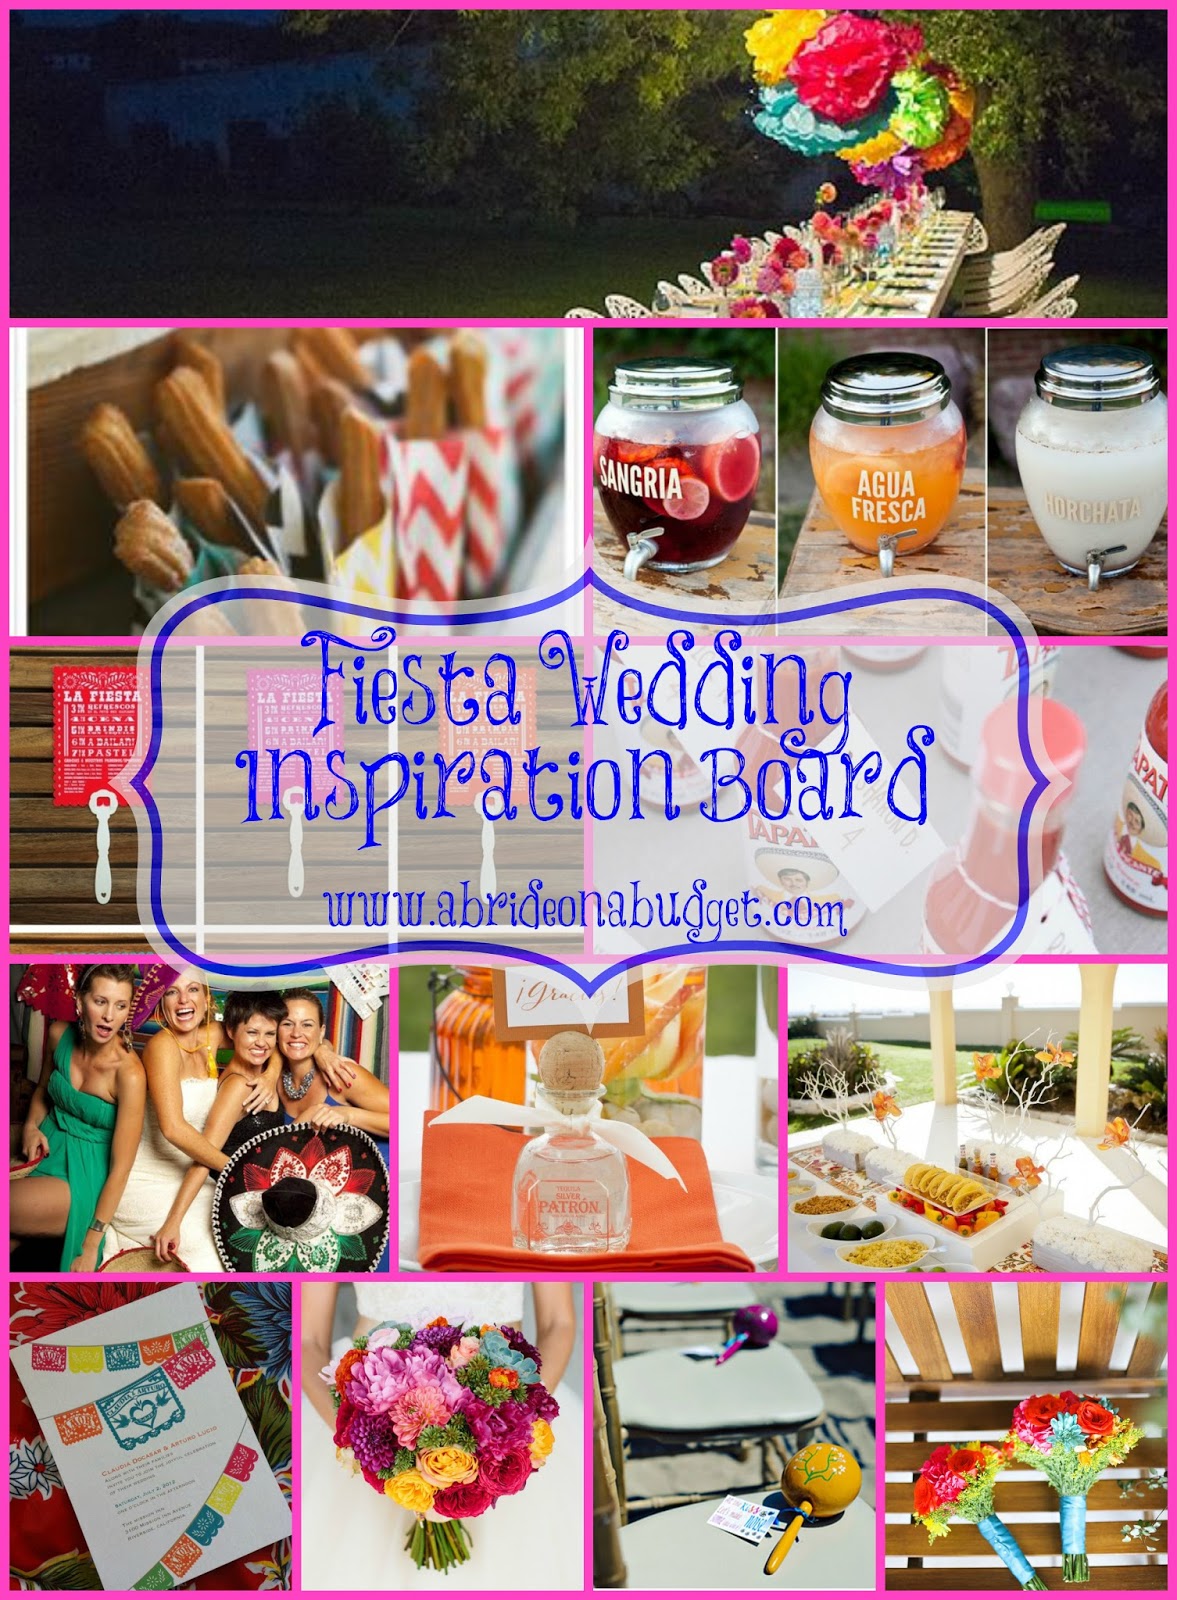 Don't you just LOVE all the colors in a fiesta wedding? If you're planning one, check out this Fiesta Wedding Inspiration Board at www.abrideonabudget.com.